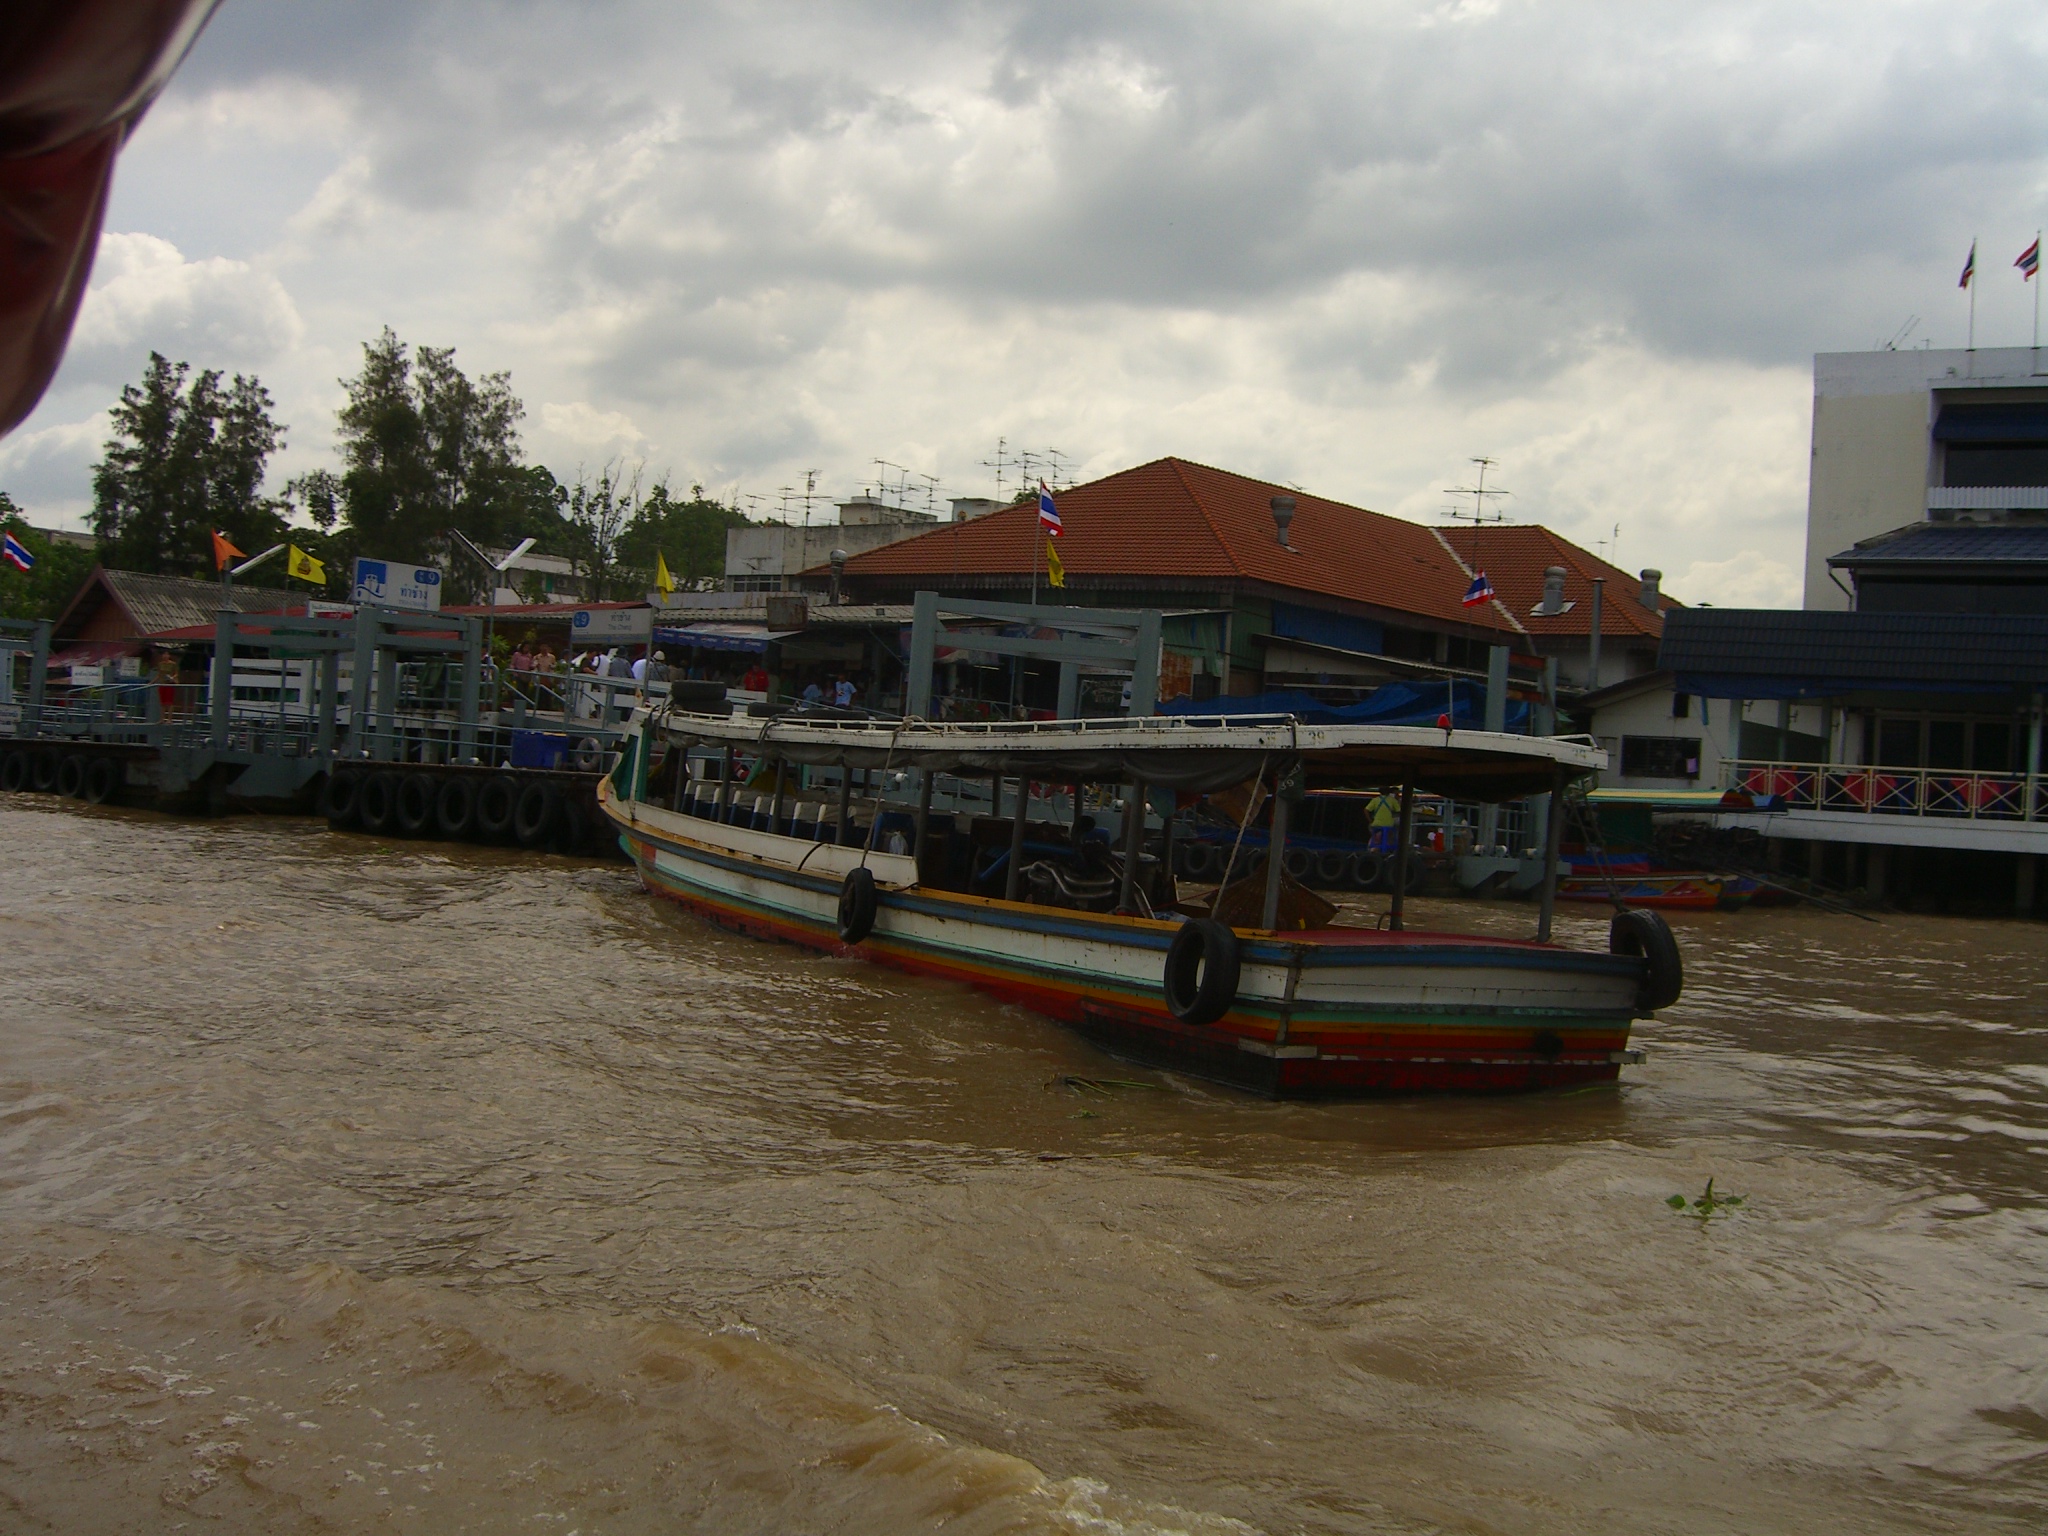 two boats on the water in front of buildings